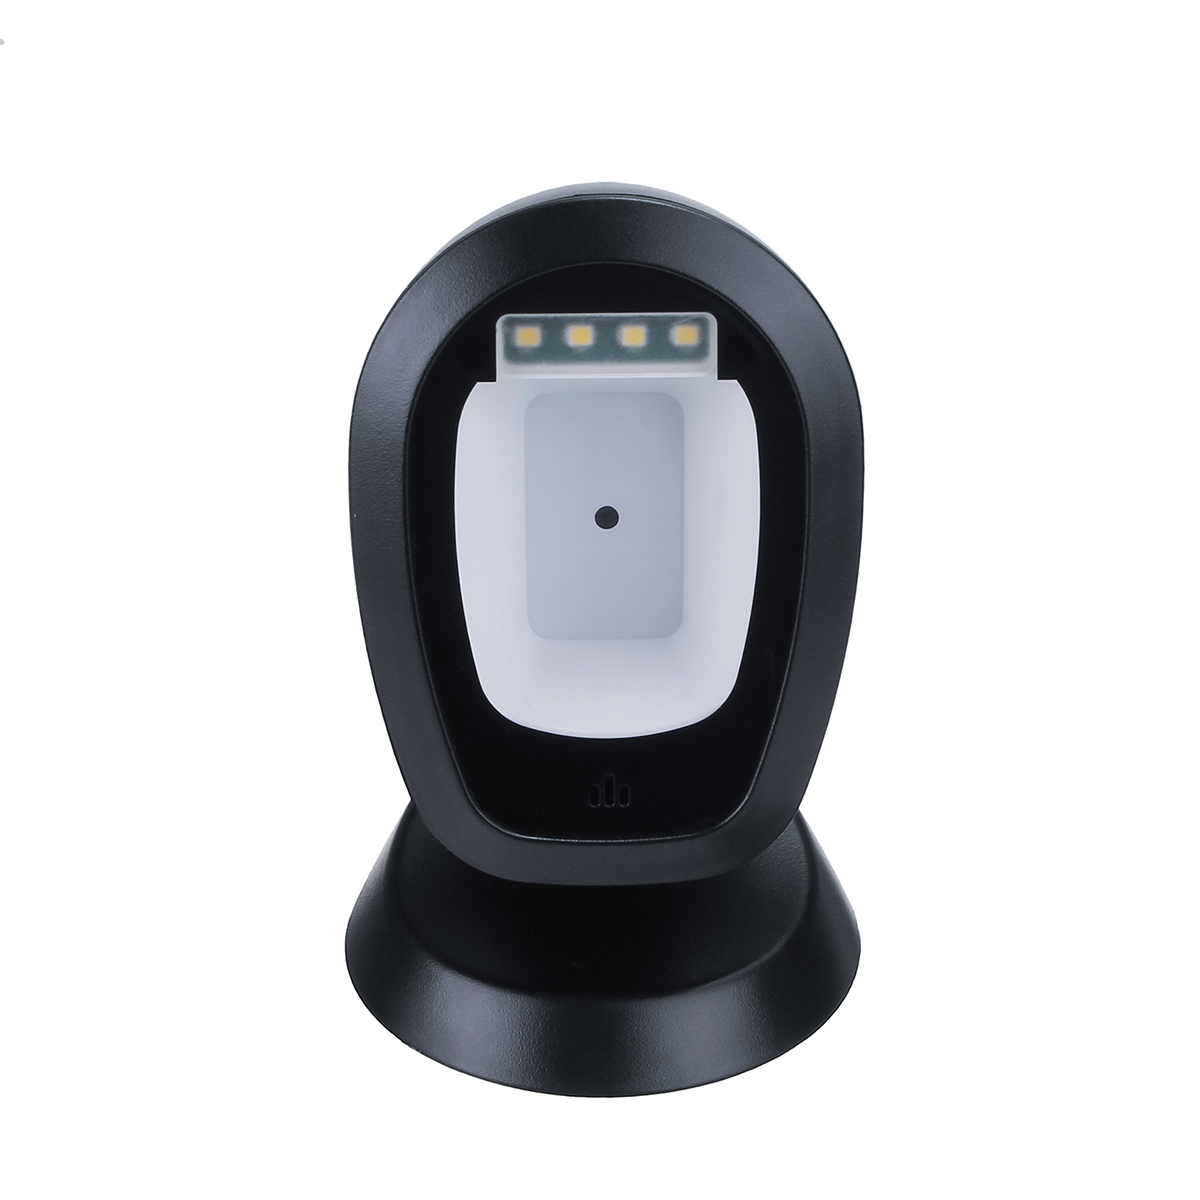 

SHANGCHEN SC-7110 Handsfree 1D 2D Barcode Scanner 360 Degrees Rorating Scanning Platform with USB Interface